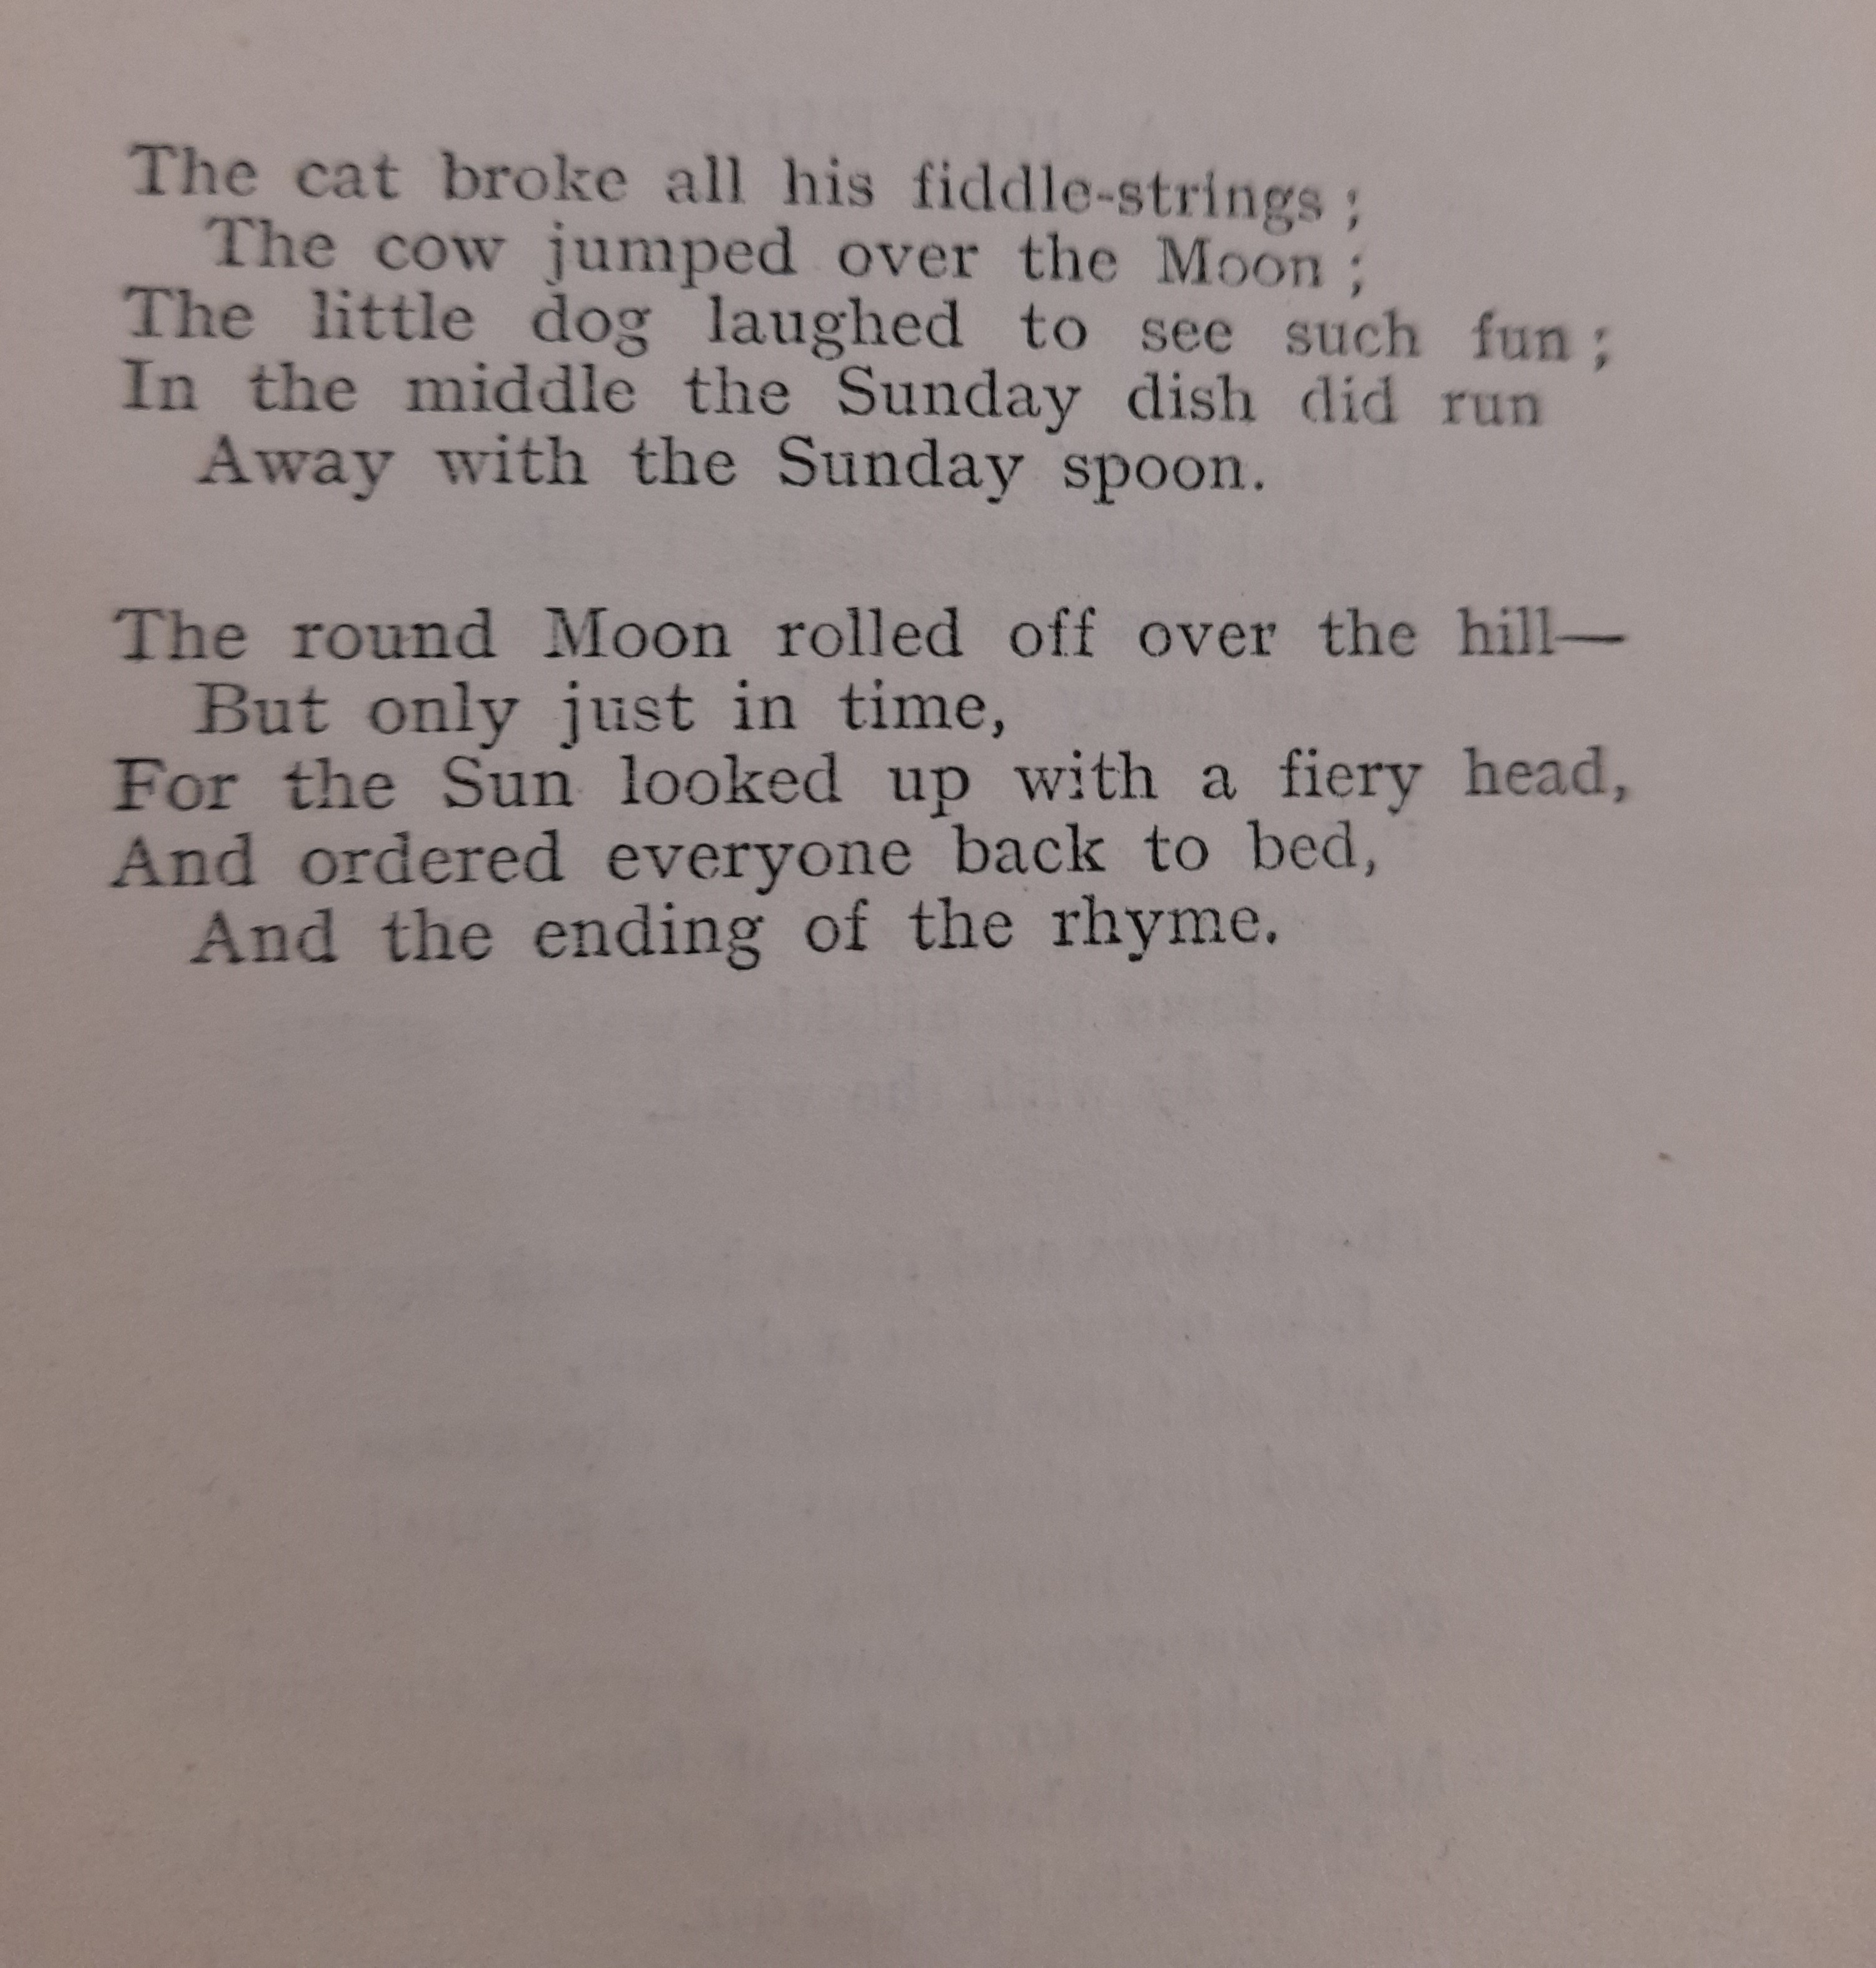 The Cat and the Fiddle A Nursery-Rhyme Undone and its Scandalous Secret Unlocked, Yorkshire Poetry, Vol. 11 No. 19, October-November 1923 page 3.jpg